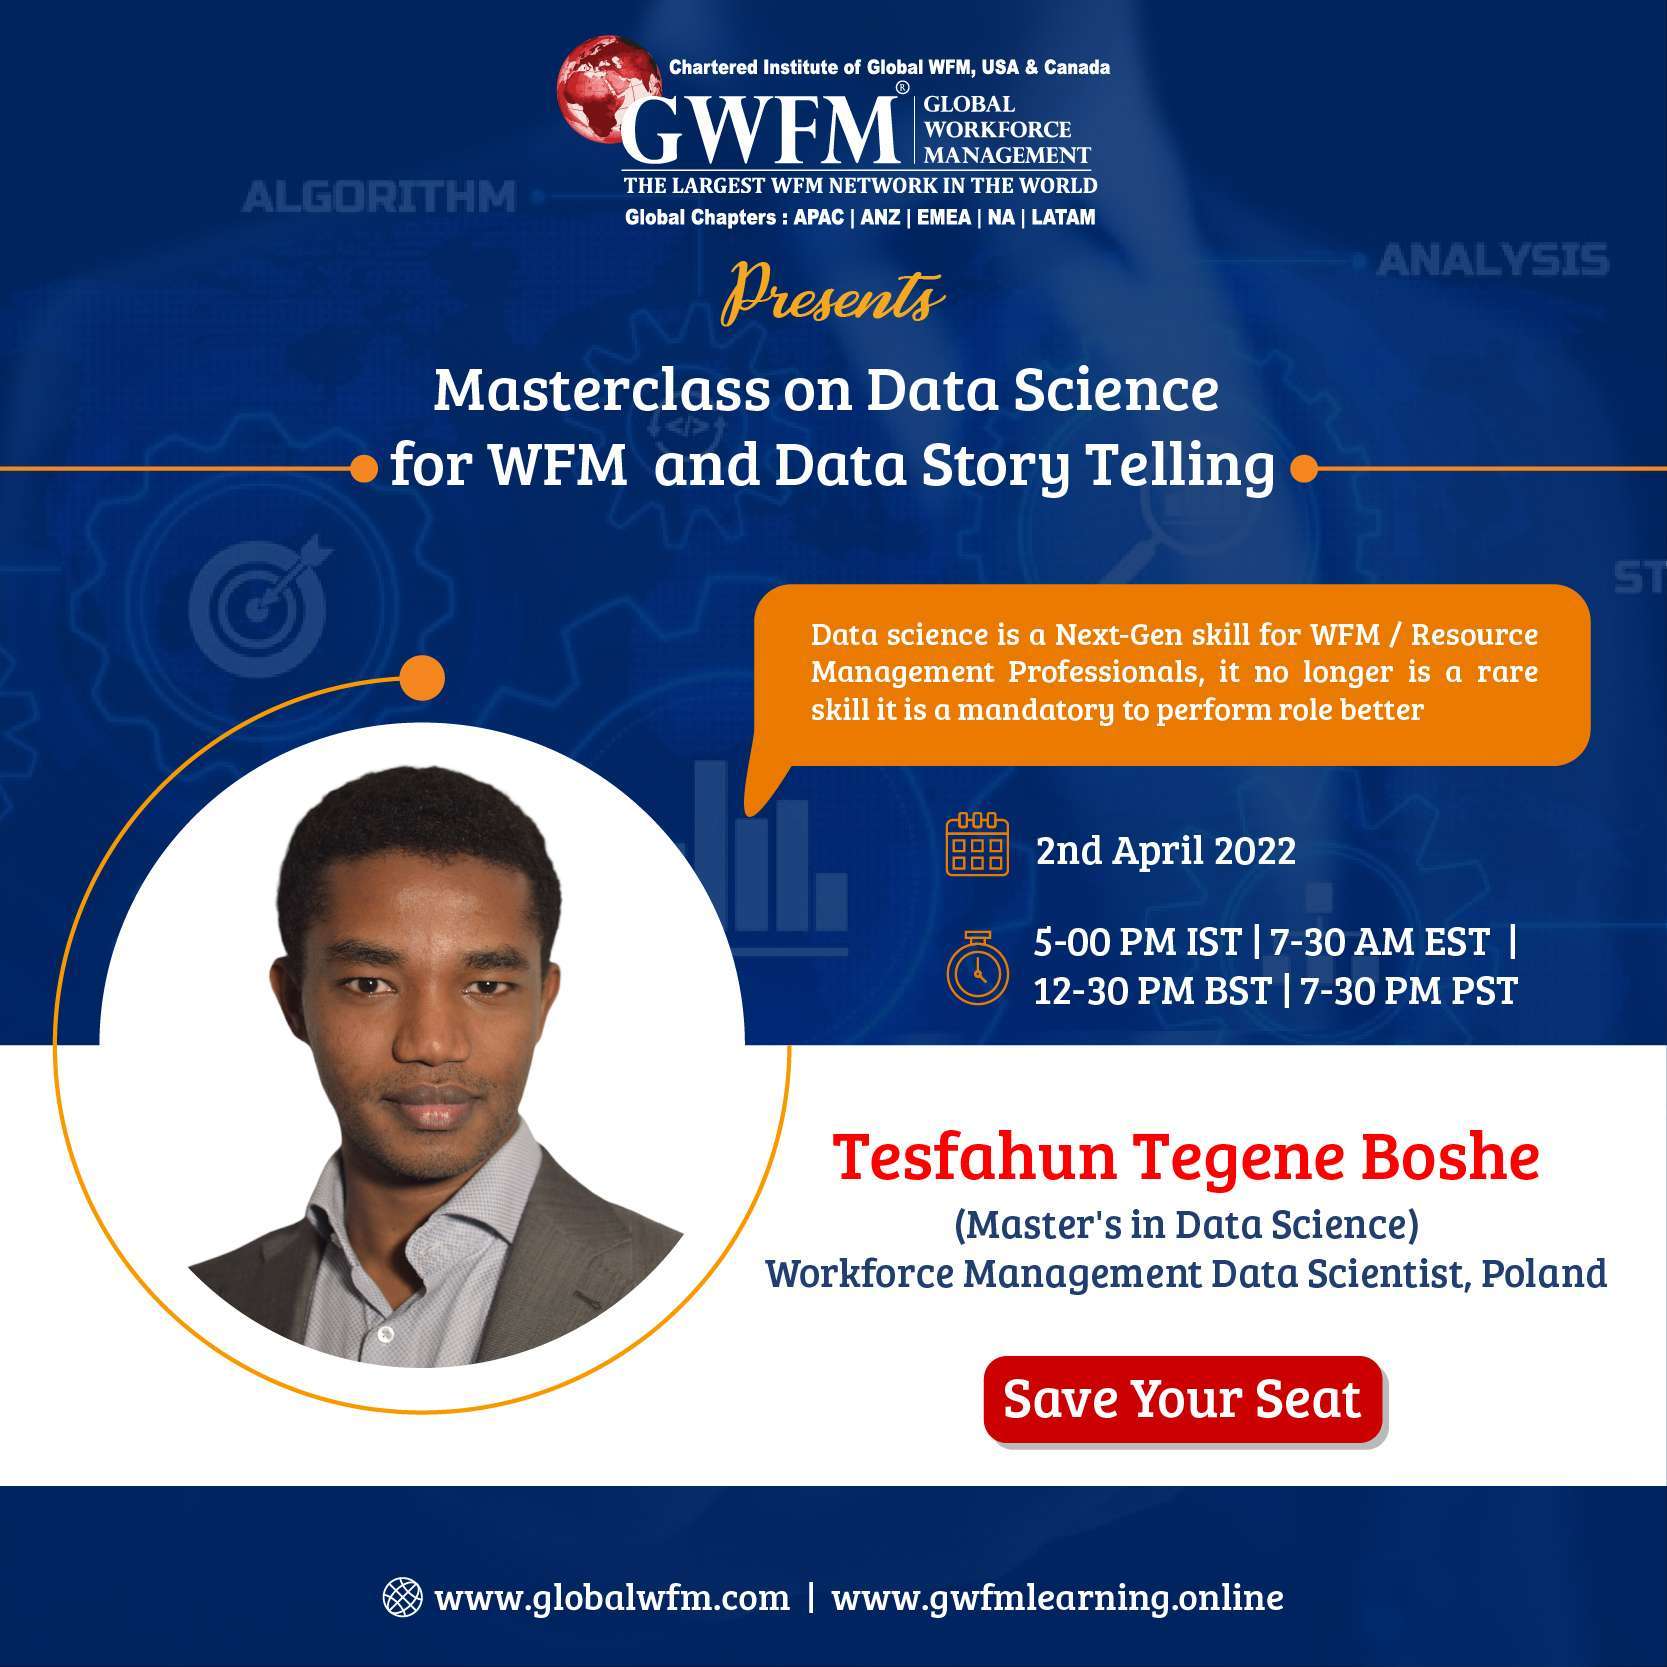 GWFM Masterclass on Data Science for WFM and Data Storytelling